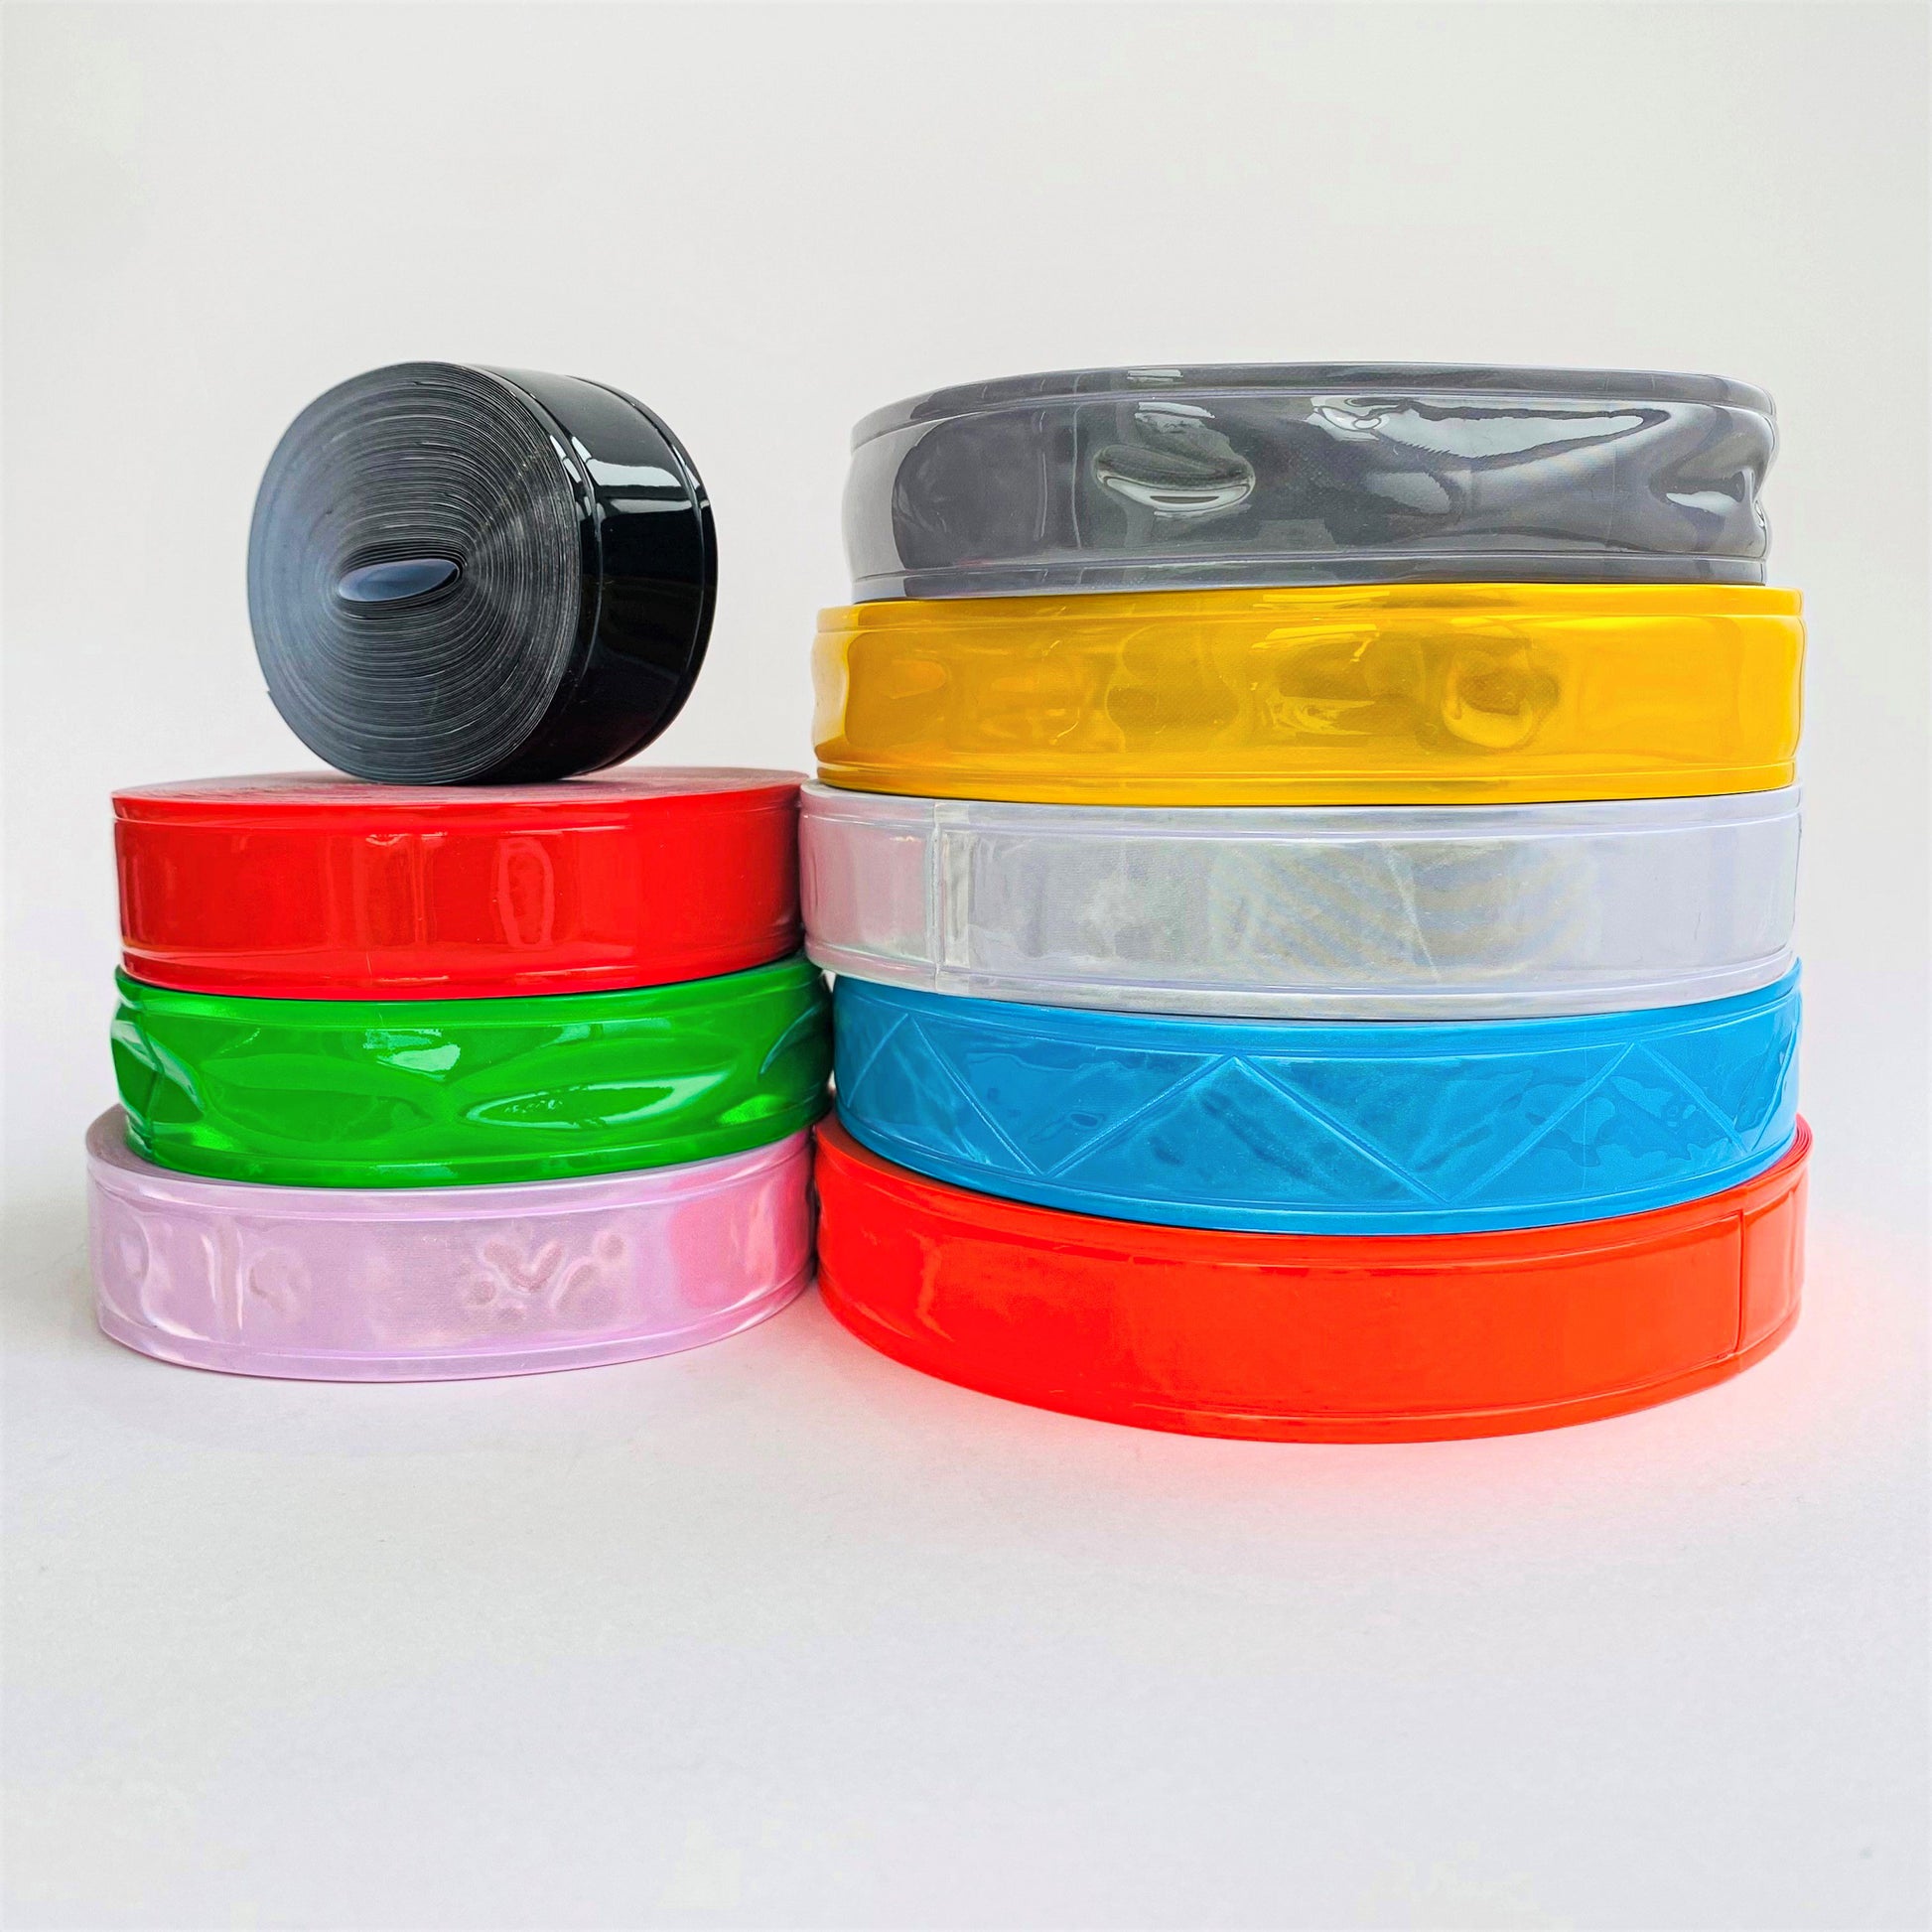 25mm reflective prism tape